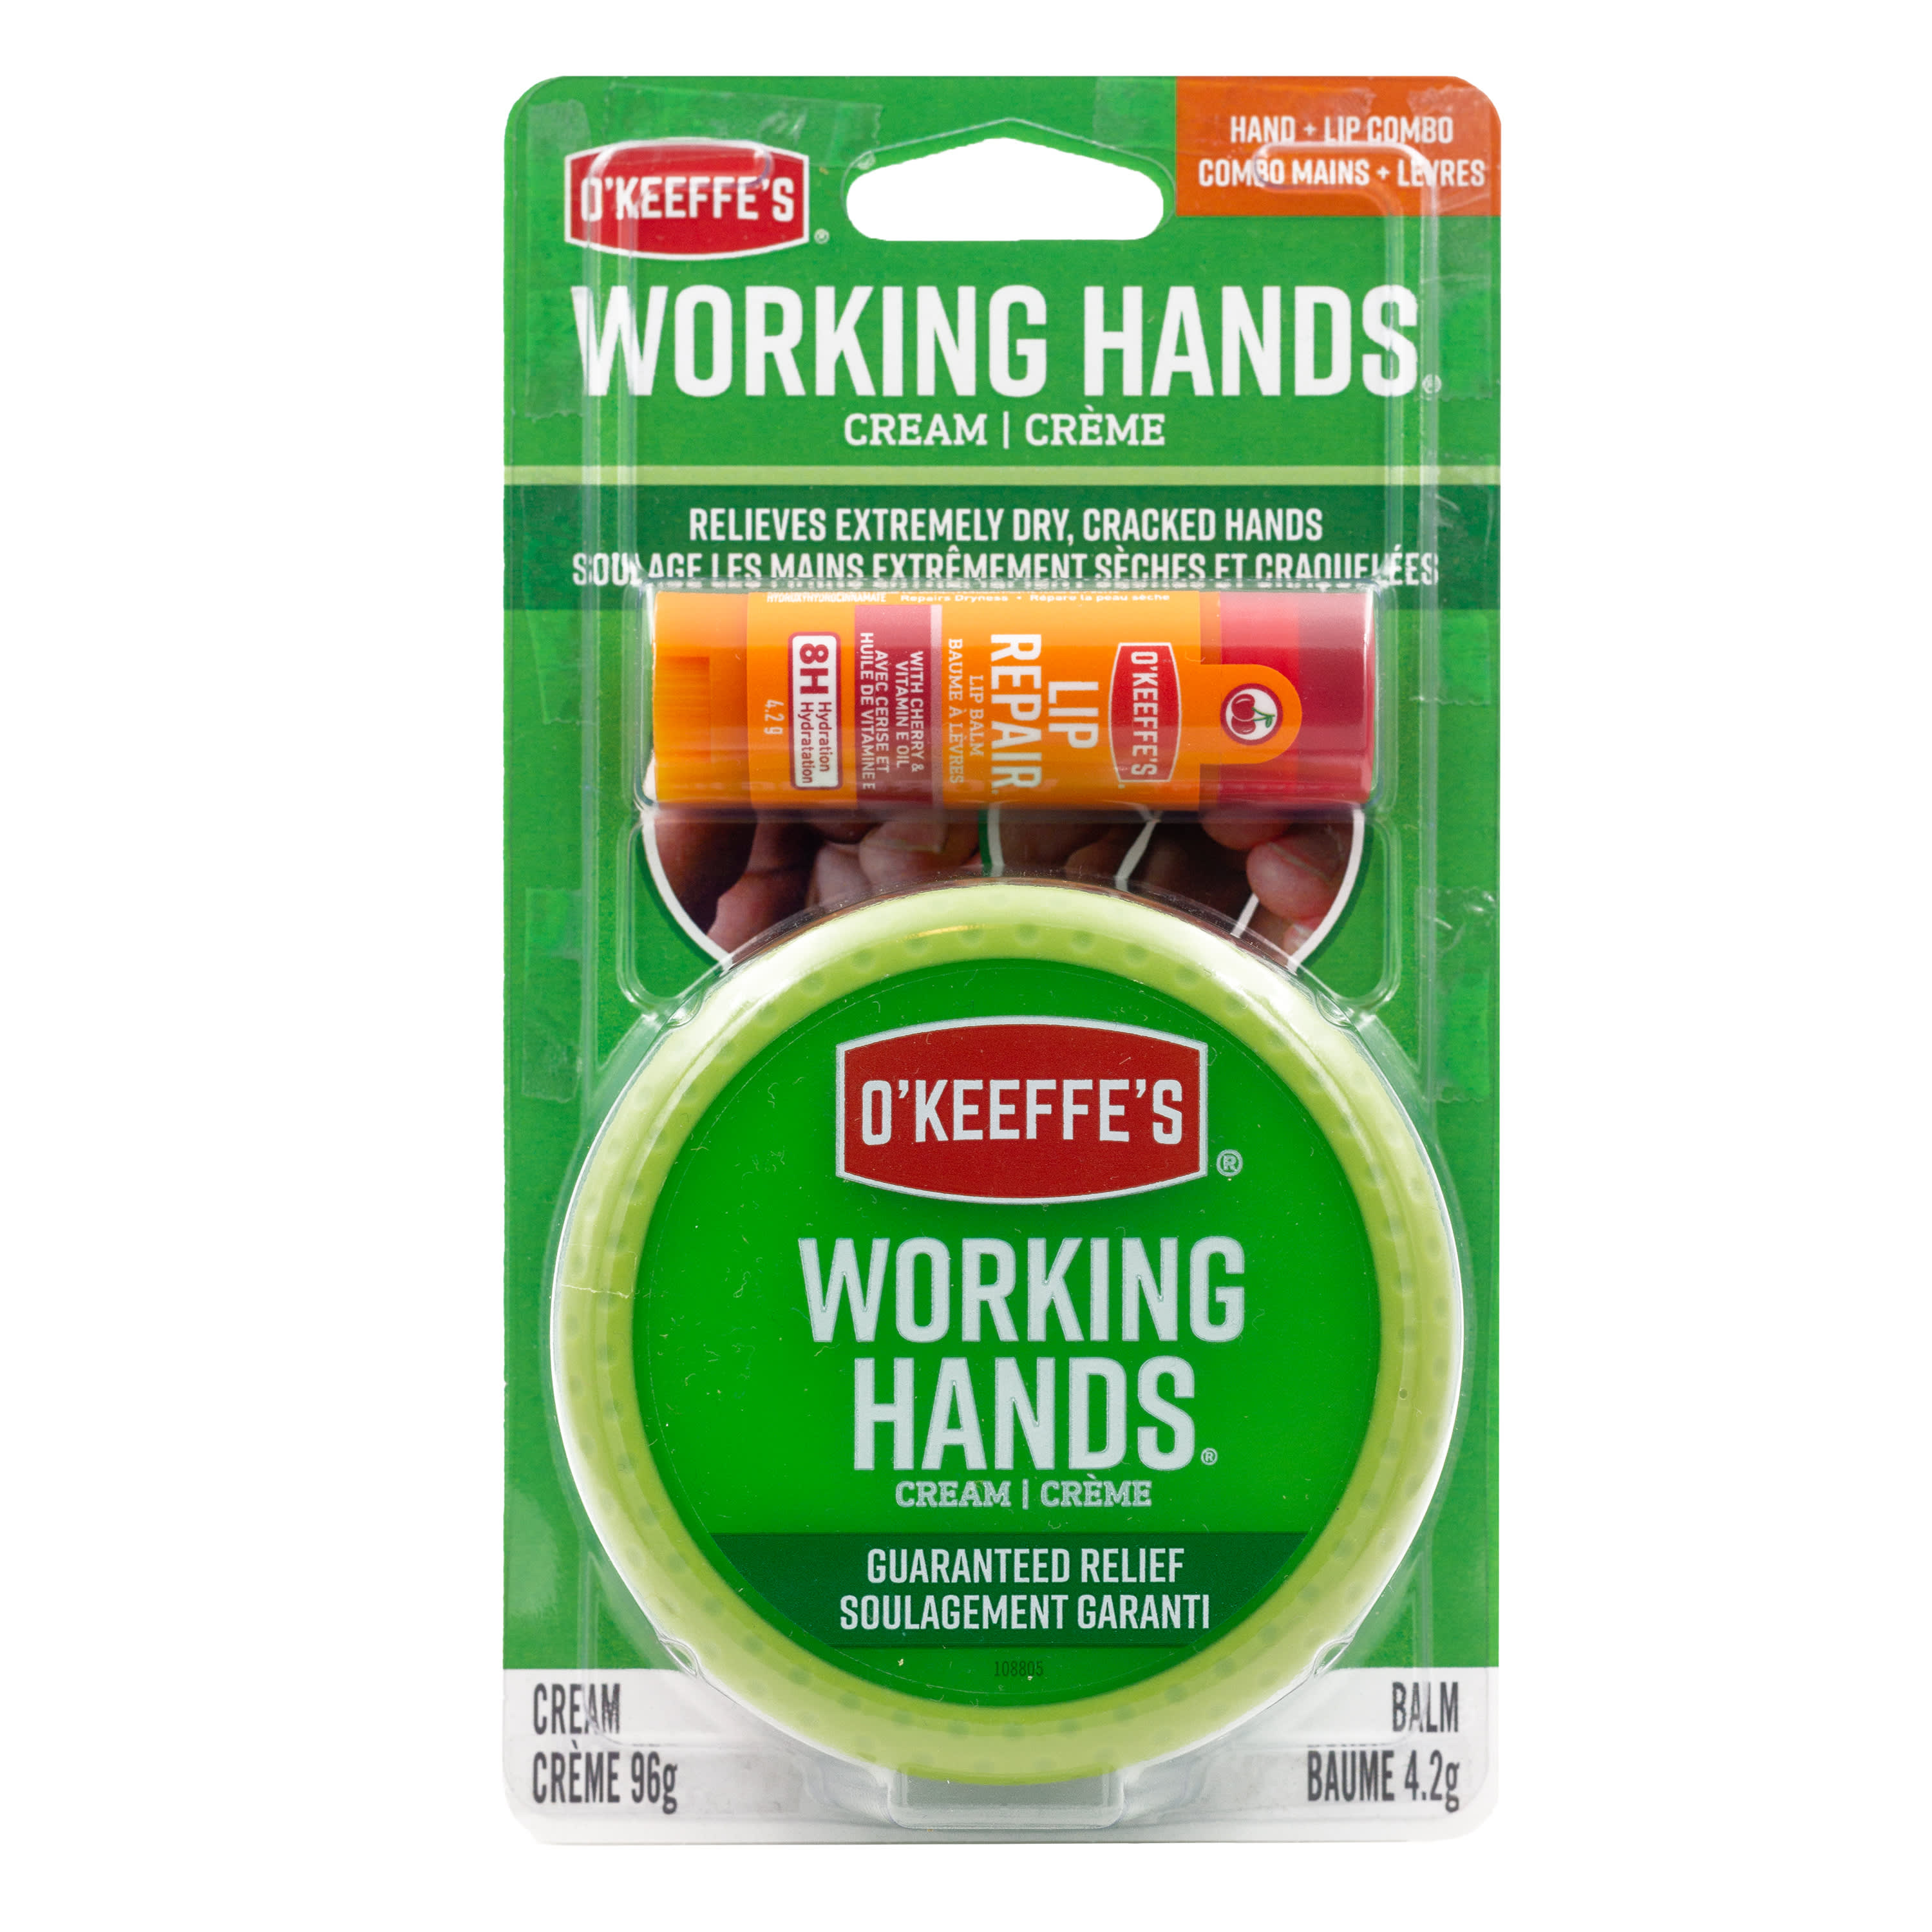 O'Keeffe's Working Hands Personal Care Jar with Lip Repair